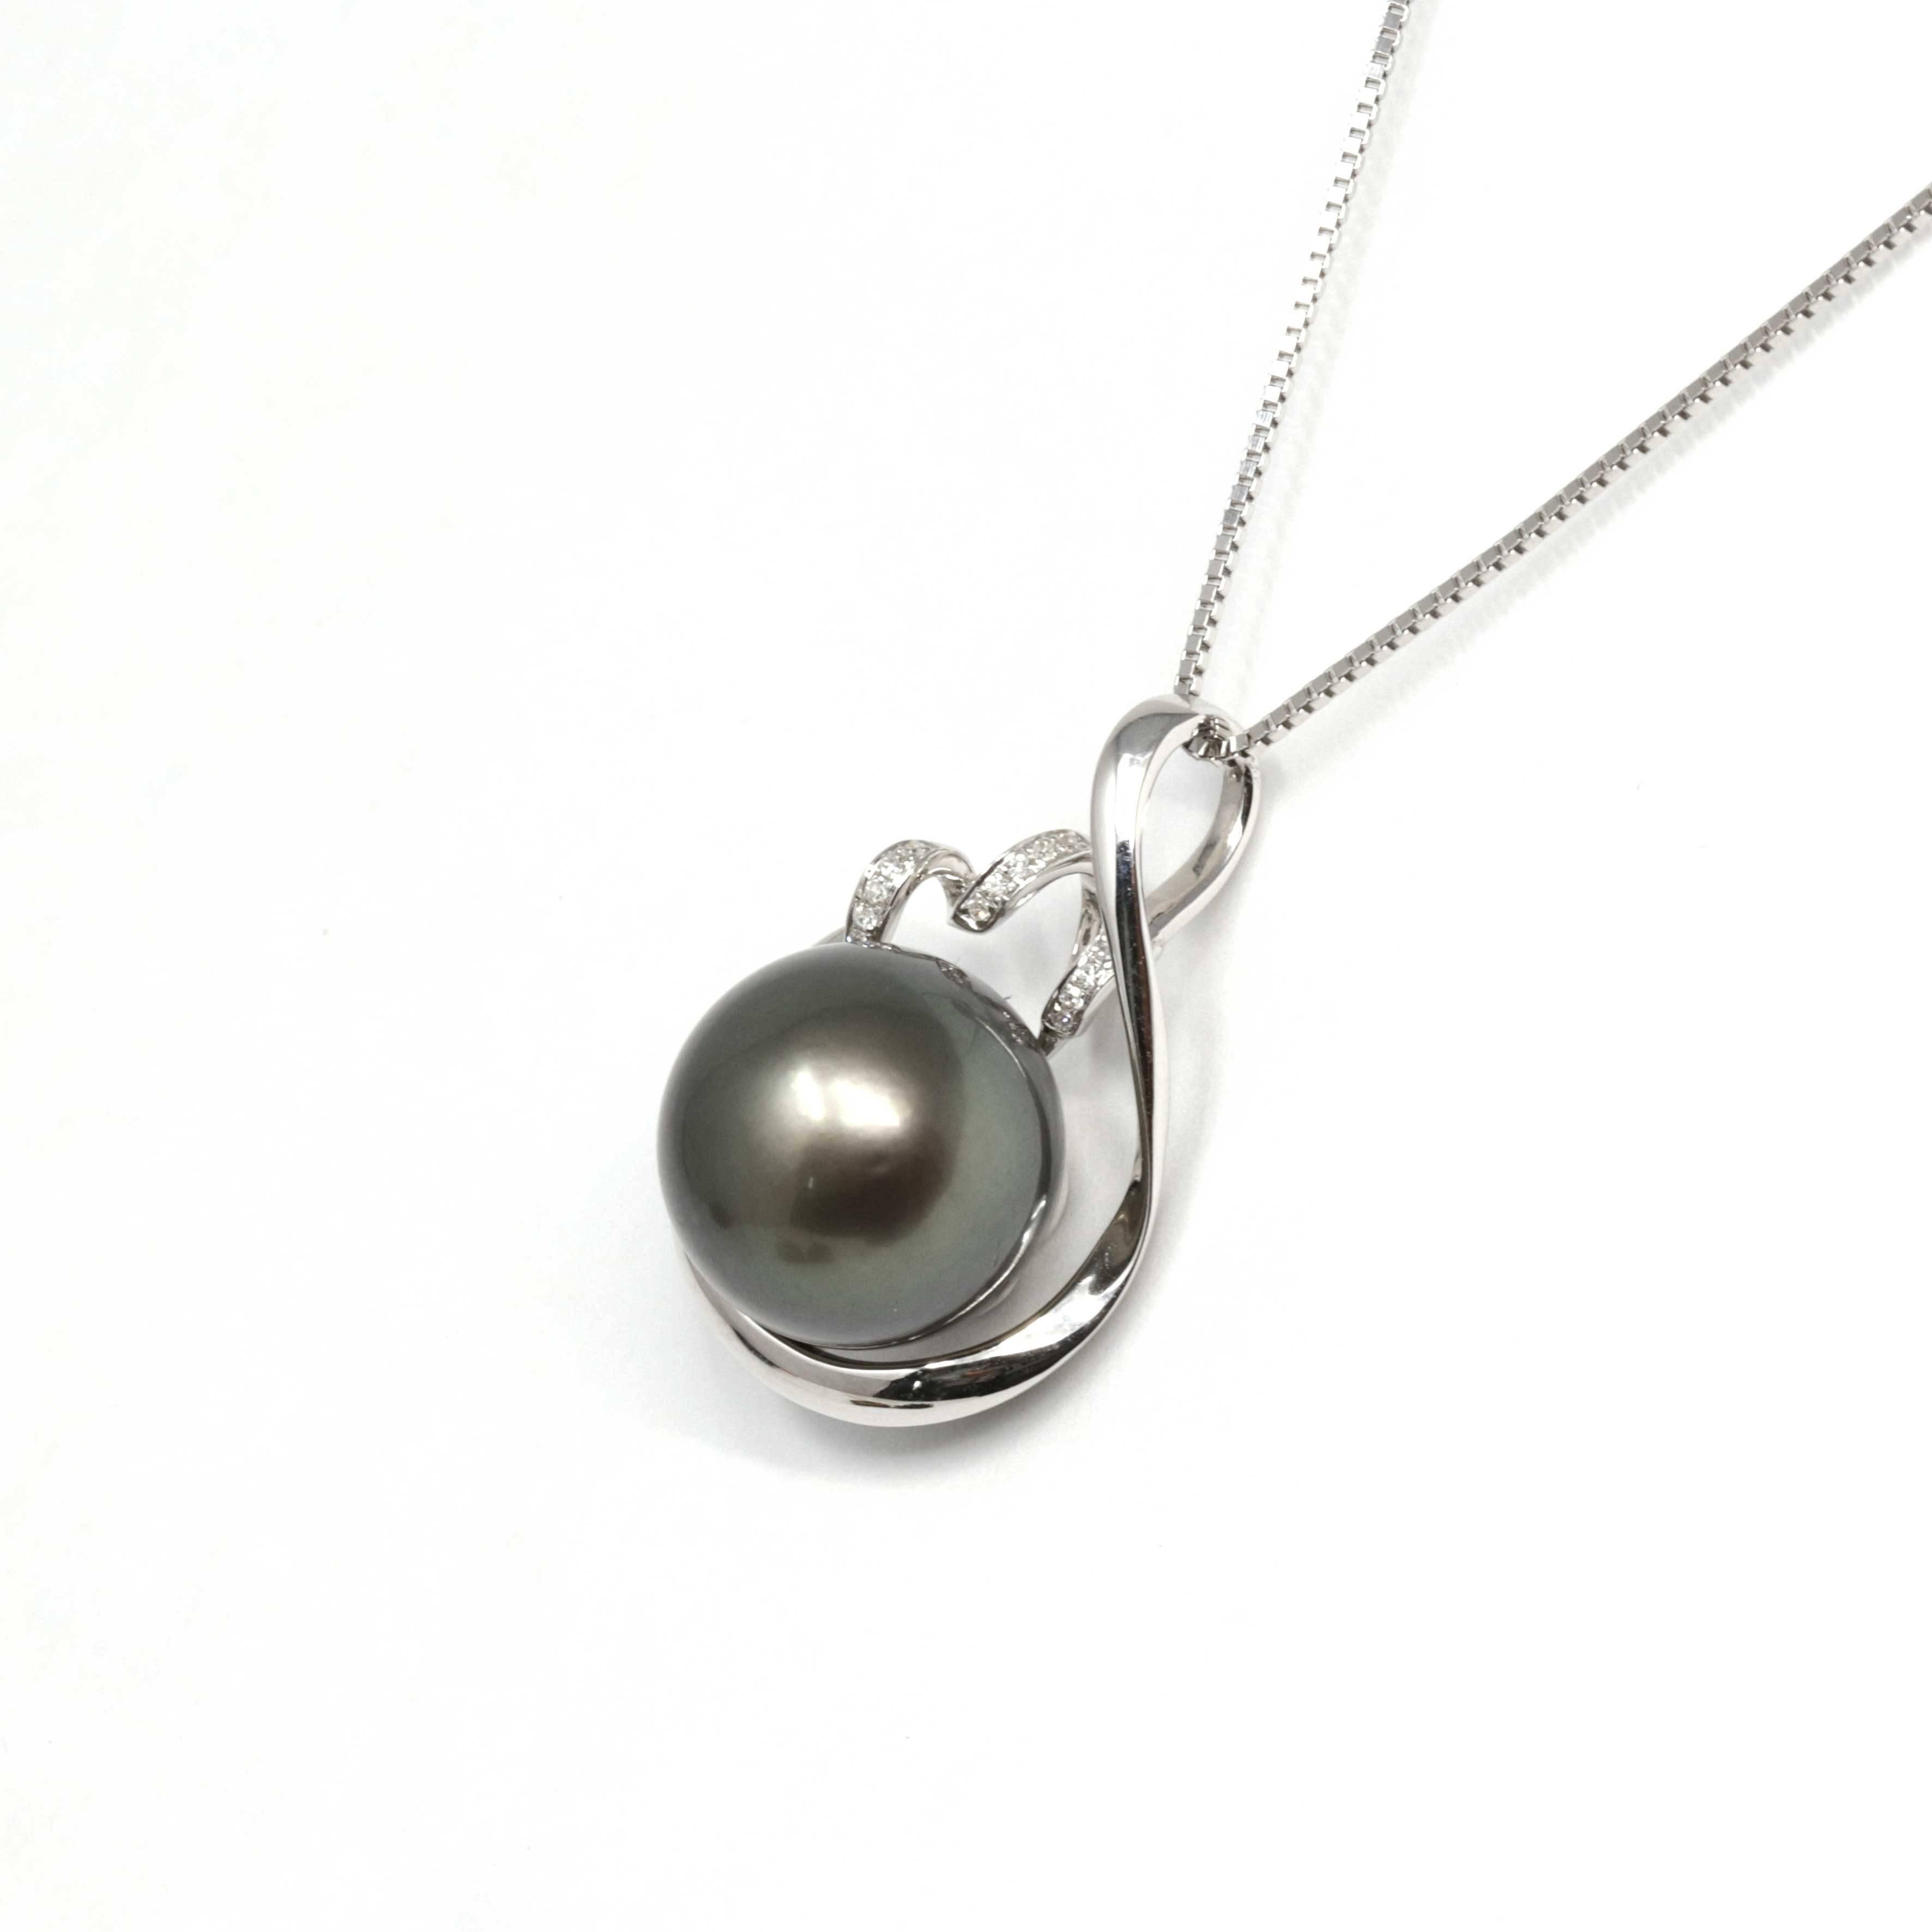 * INTRODUCTION: Lustrous 13.65 mm diameter round black Tahitian South Sea cultured pearl. Can be worn on any occasion, whether formal evening event or everyday casual. This exquisite handpicked, pearls with thick and iridescent nacre are one of the